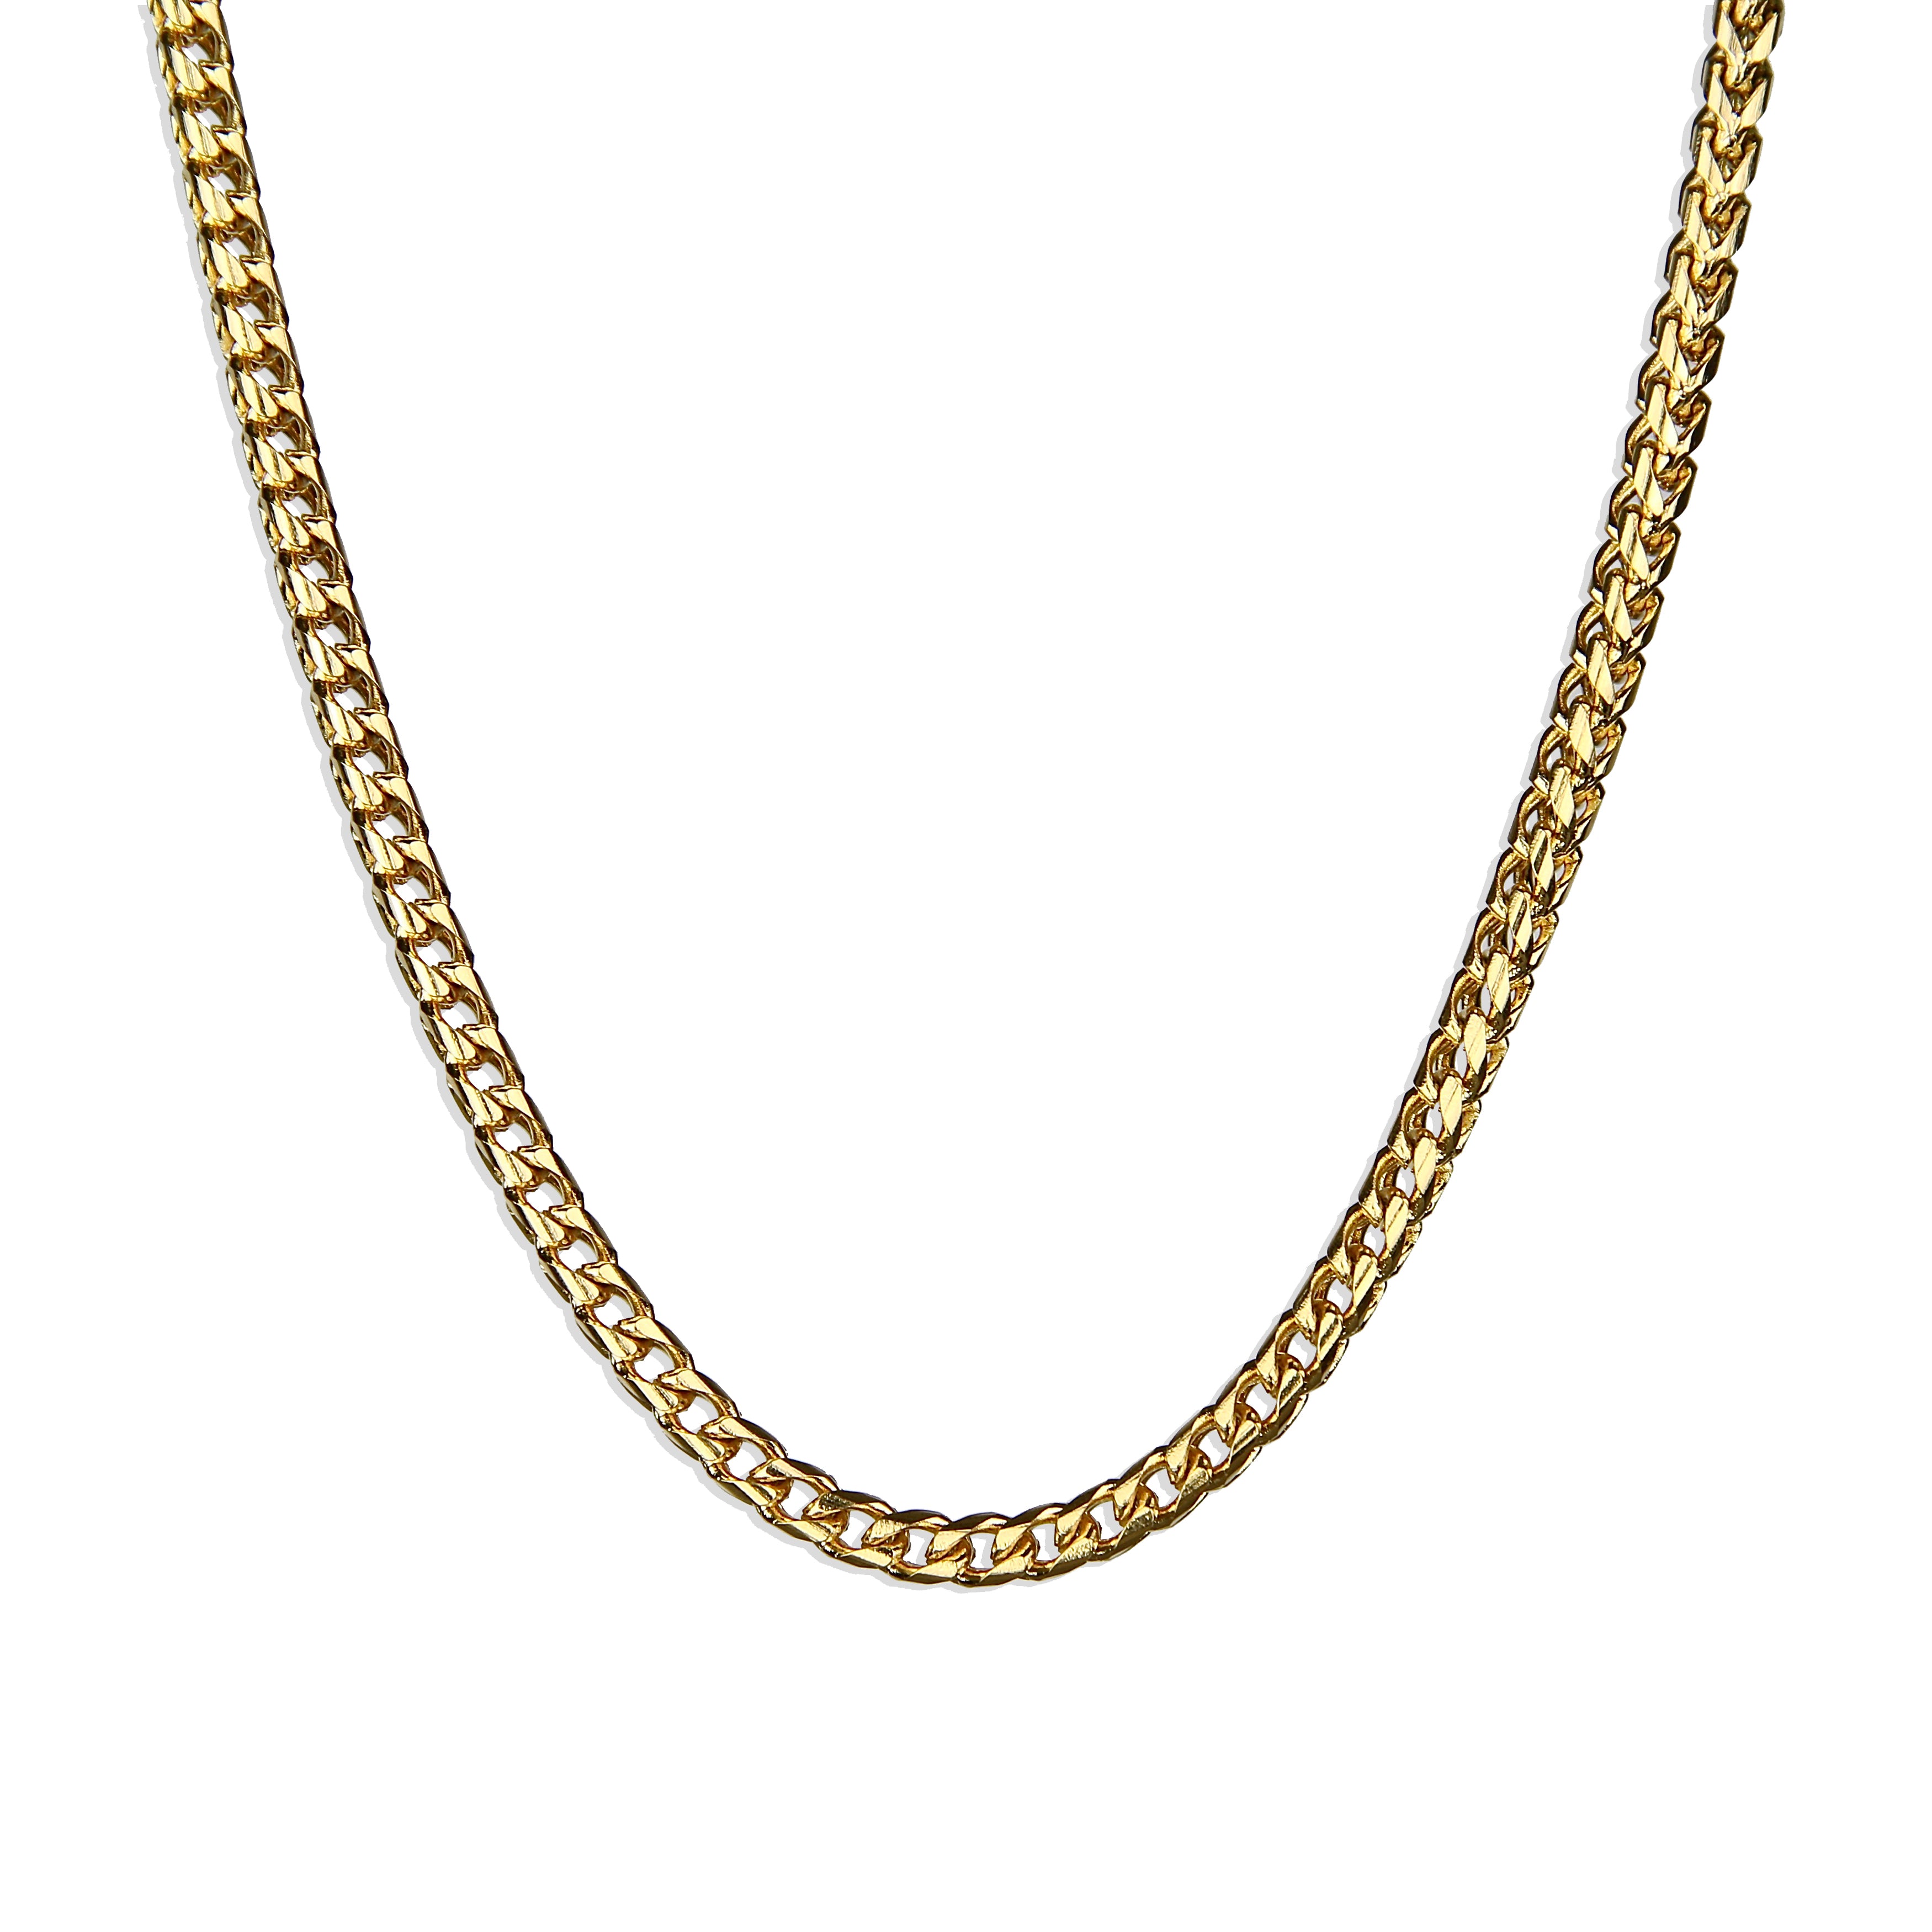 Franco Chain Necklace - Gold 3.5mm